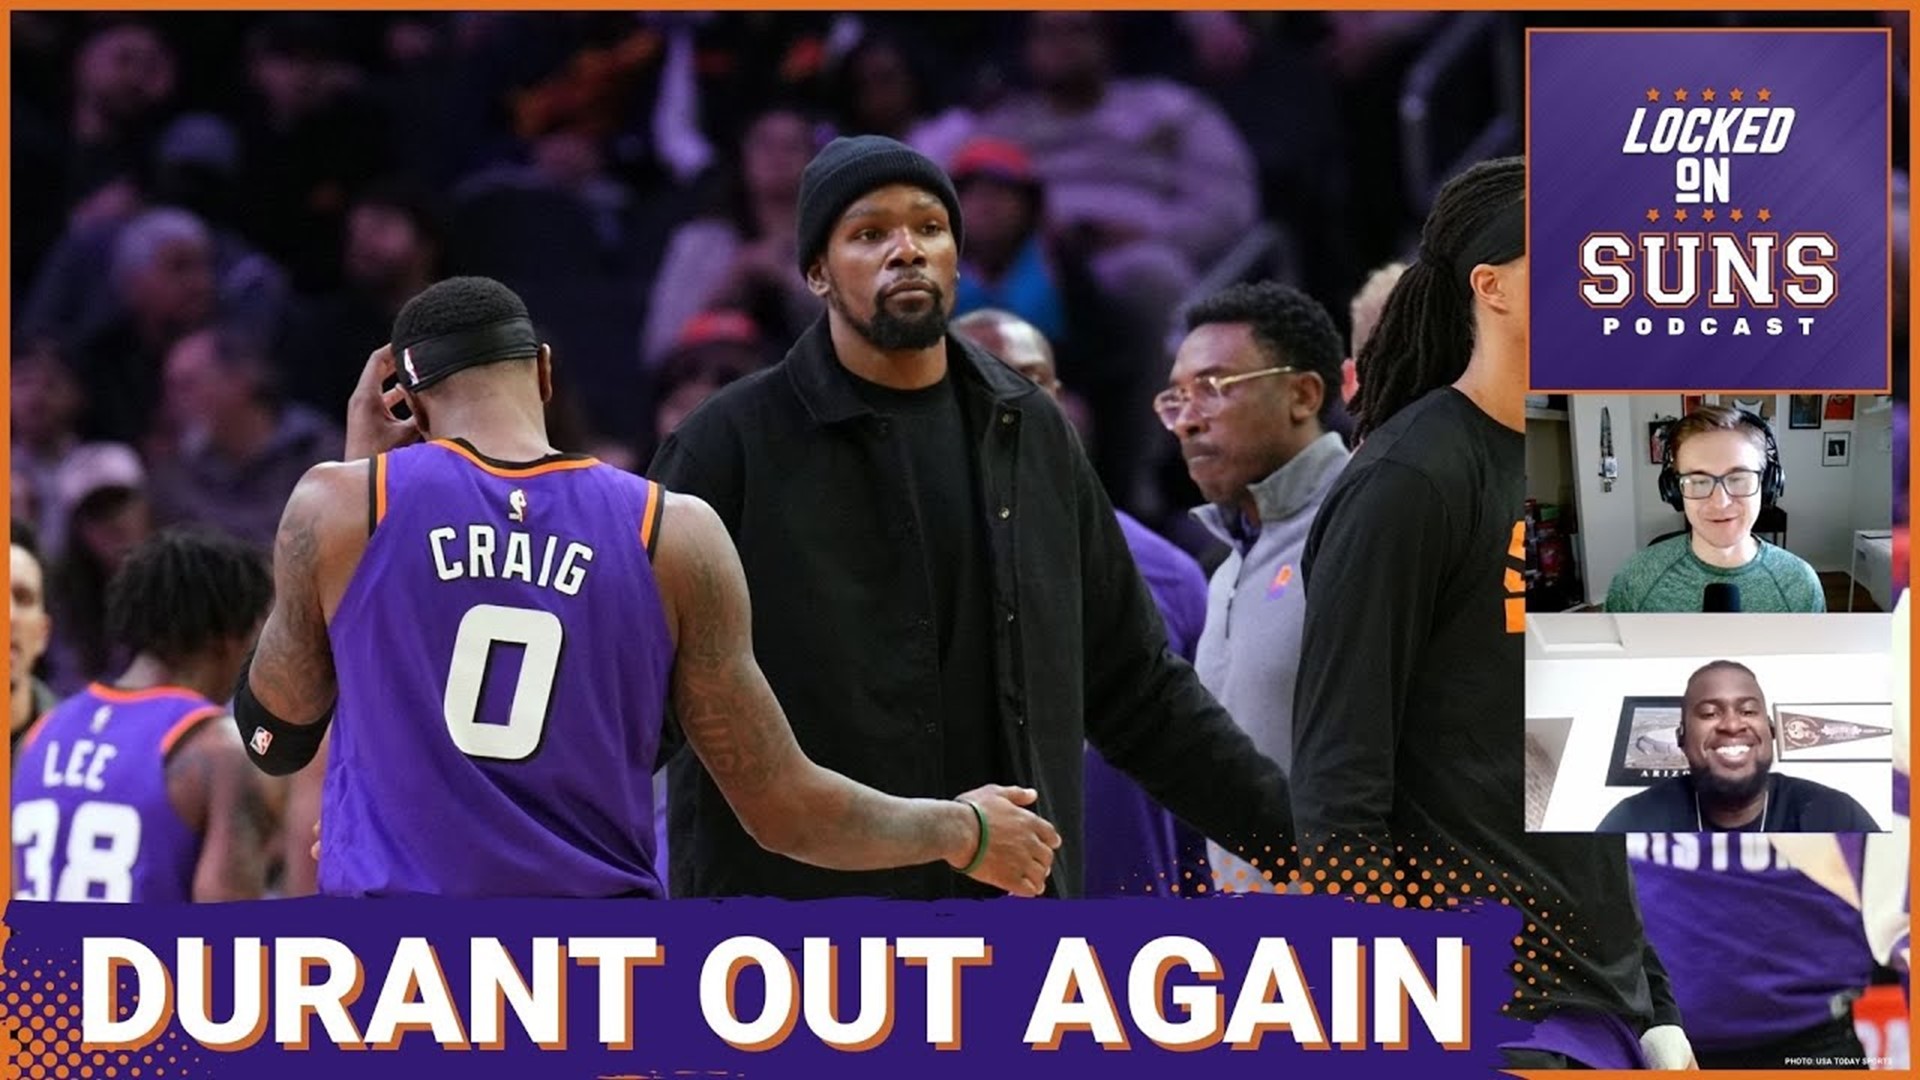 Kevin Durant is reportedly out 2-3 weeks with an ankle sprain, but Devin Booker is playing maybe the best basketball of his life for the Phoenix Suns.